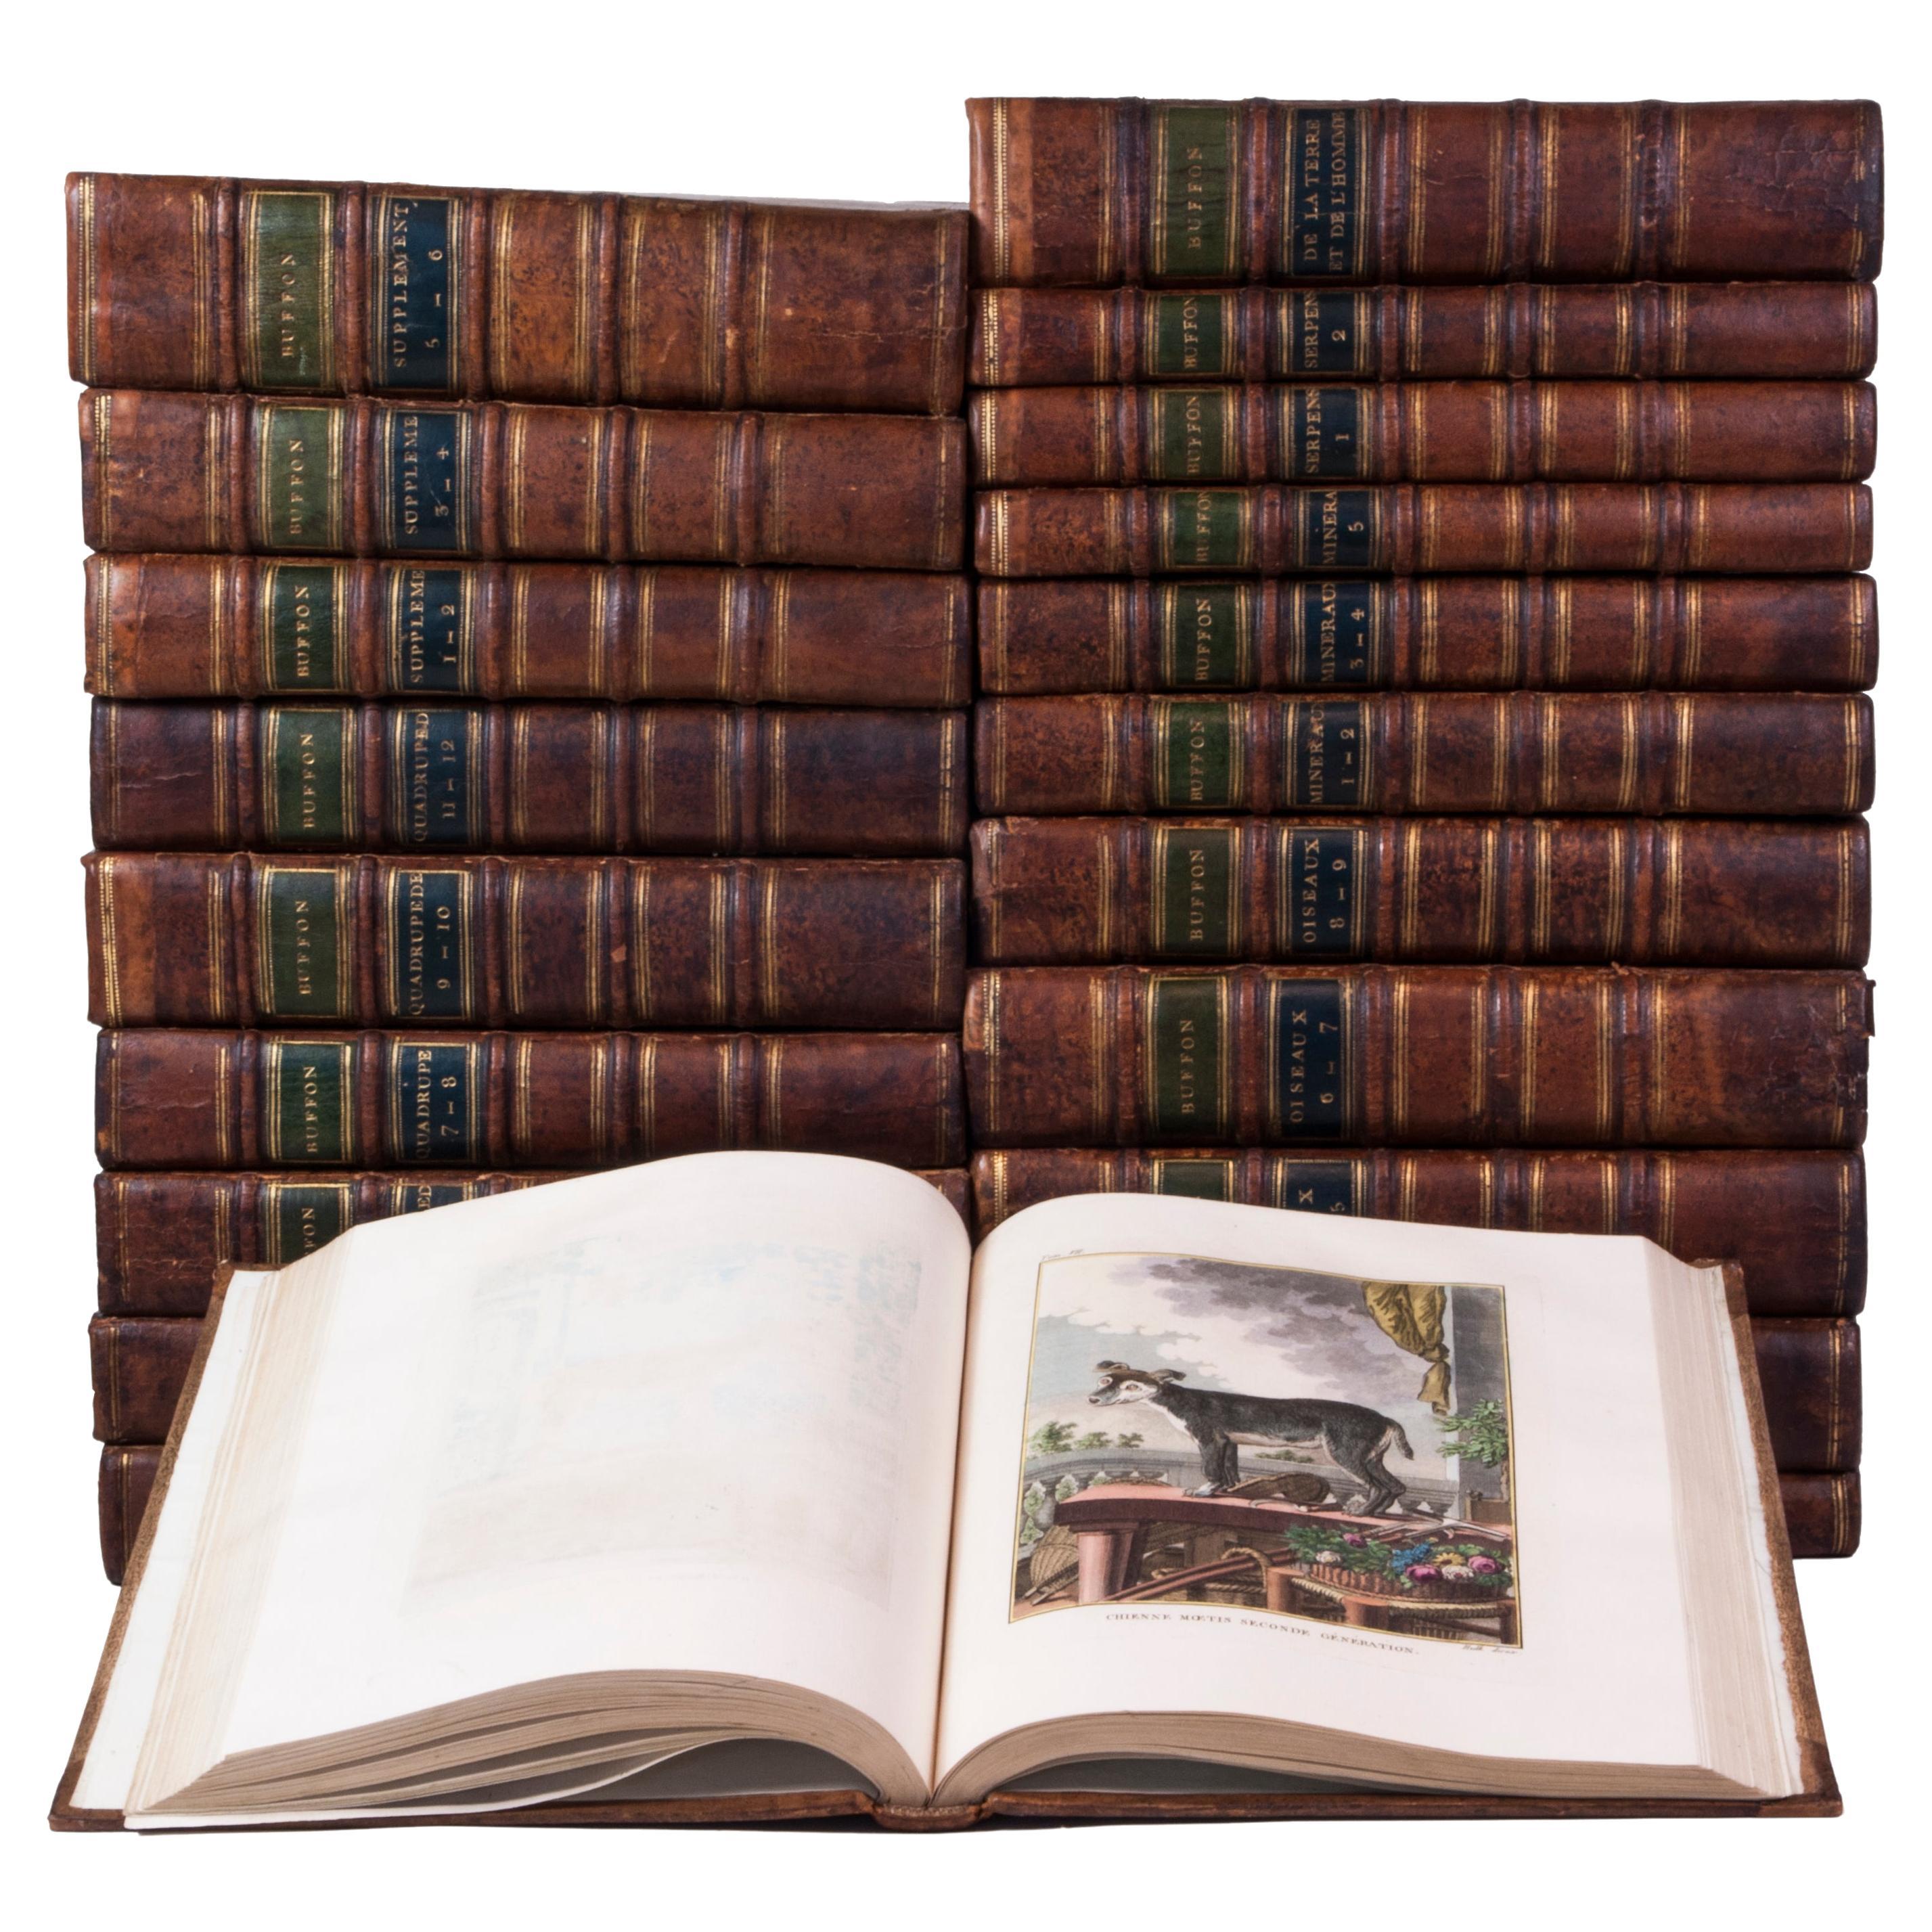 Hand-coloured set of Buffon’s Histoire naturelle in its most luxurious form For Sale